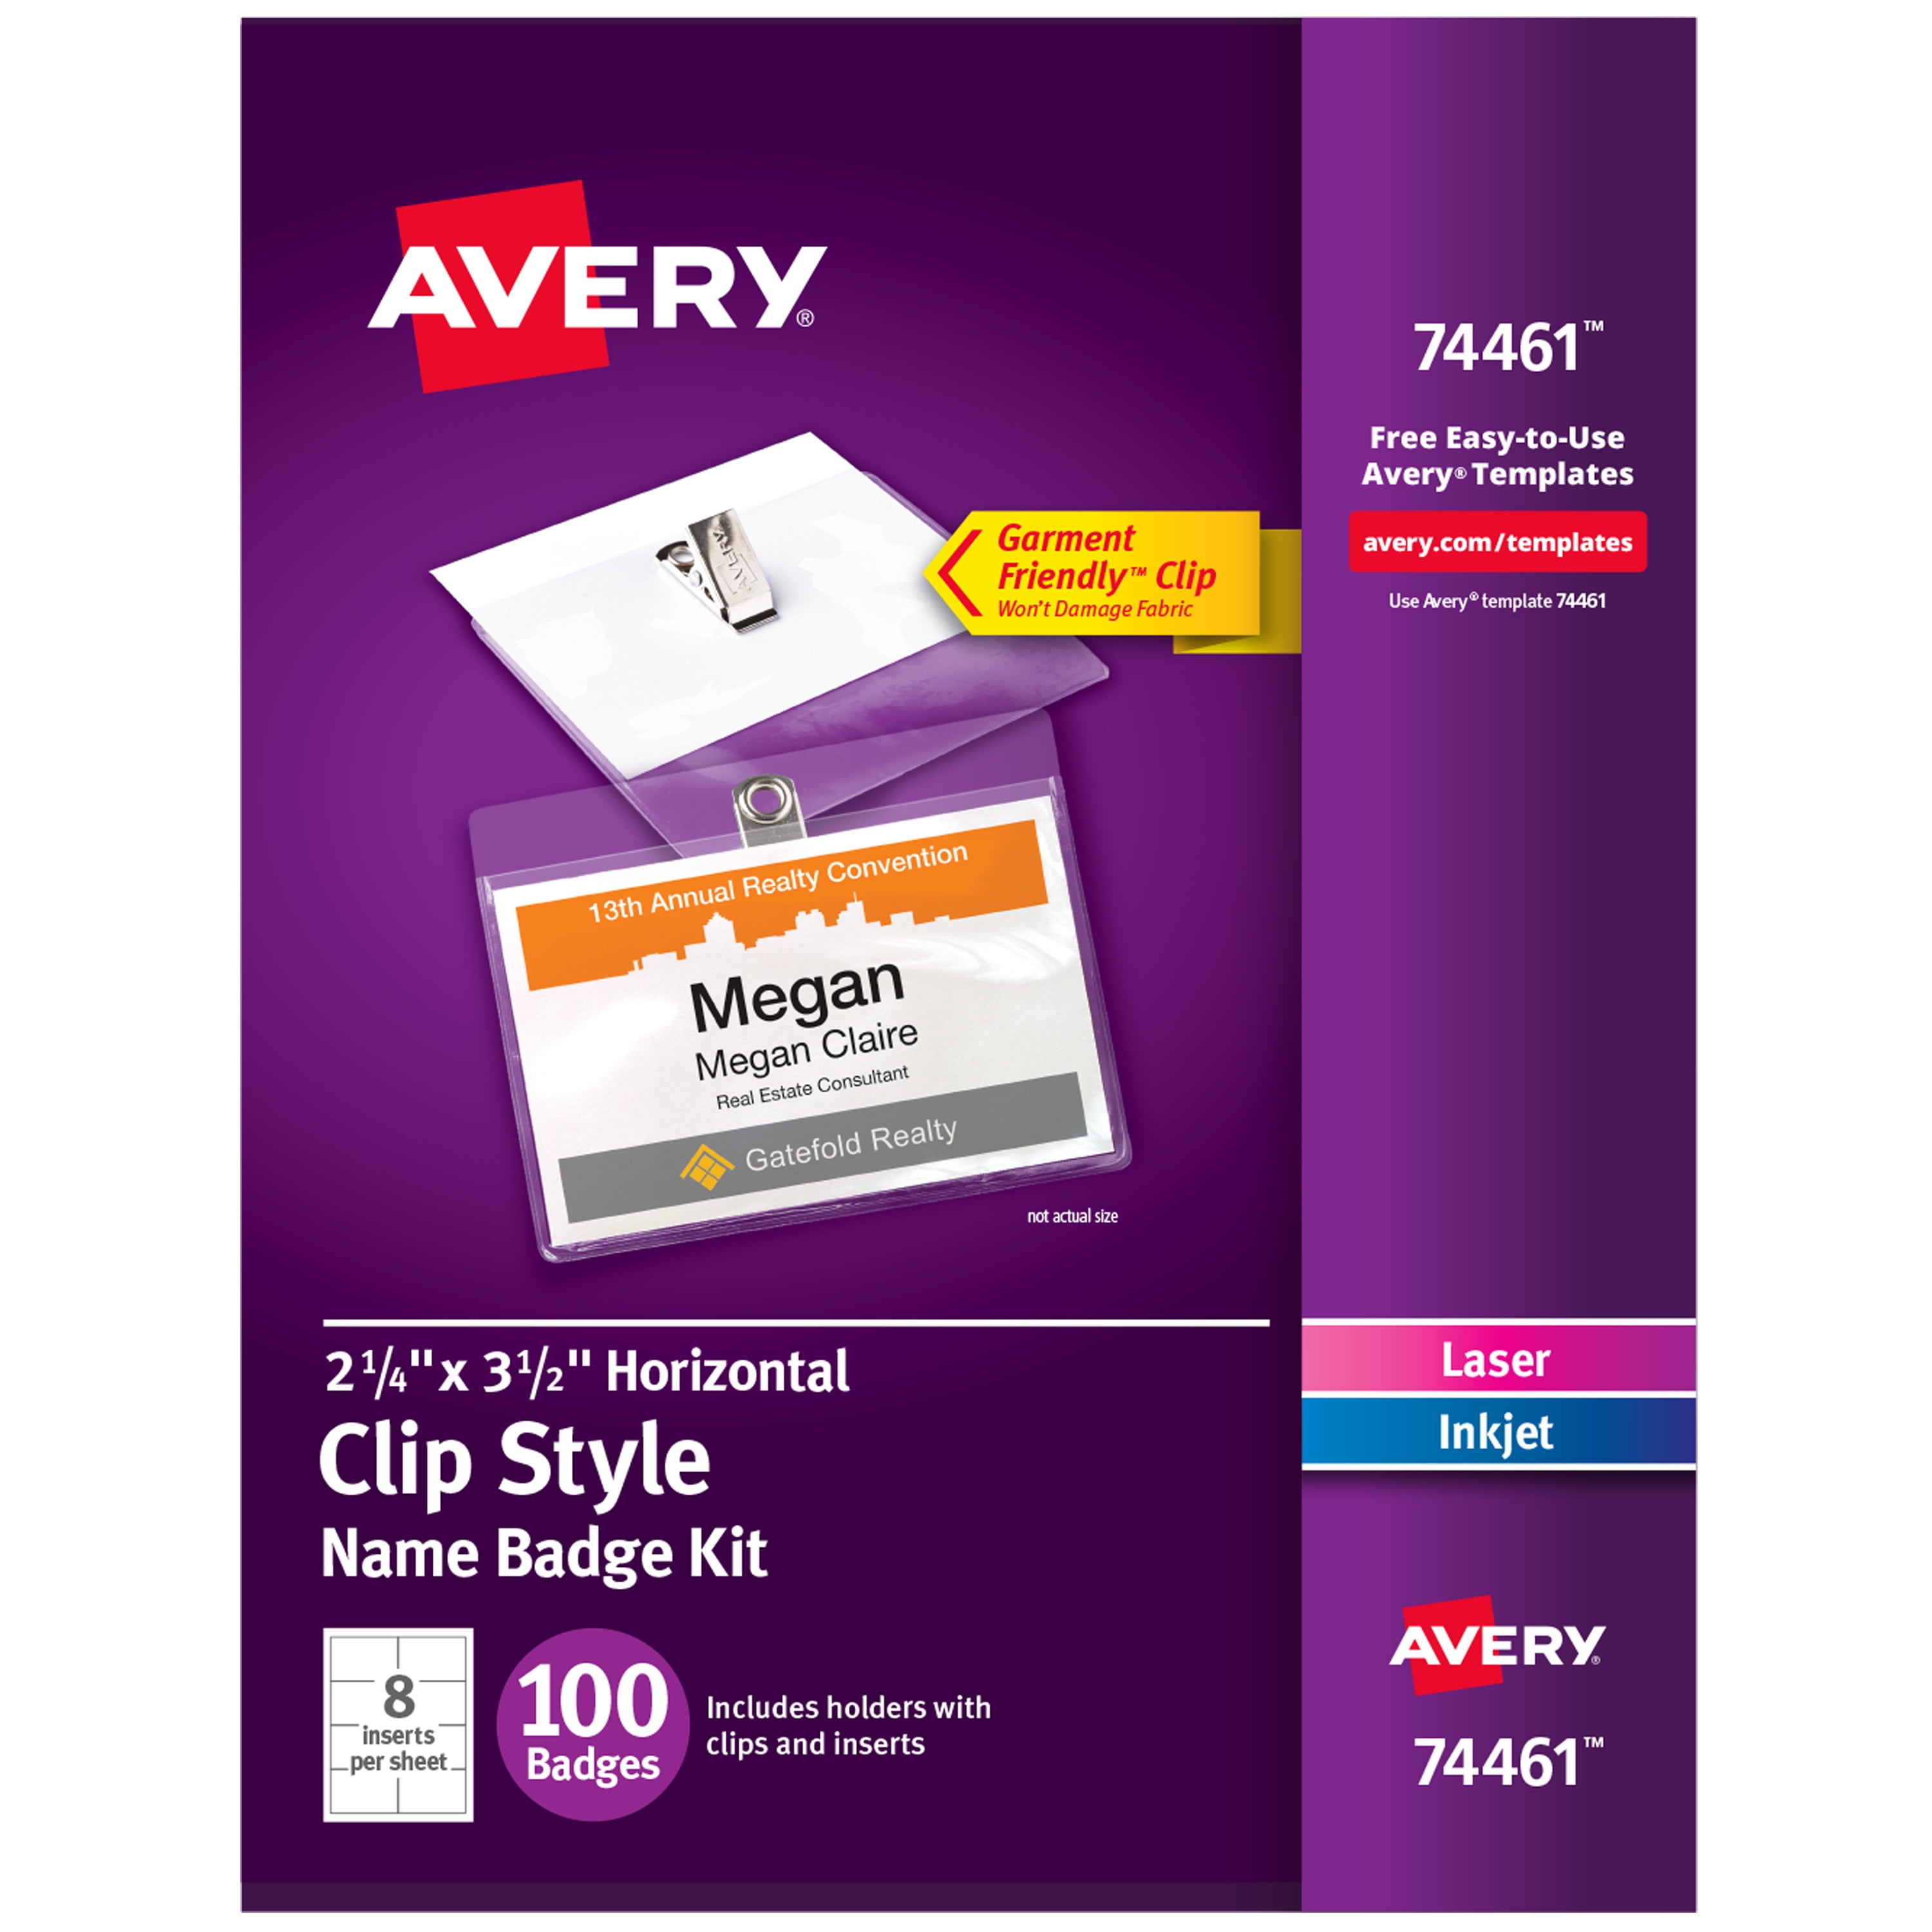 avery-clip-style-name-badges-2-1-4-x-3-1-2-100-badges-74461